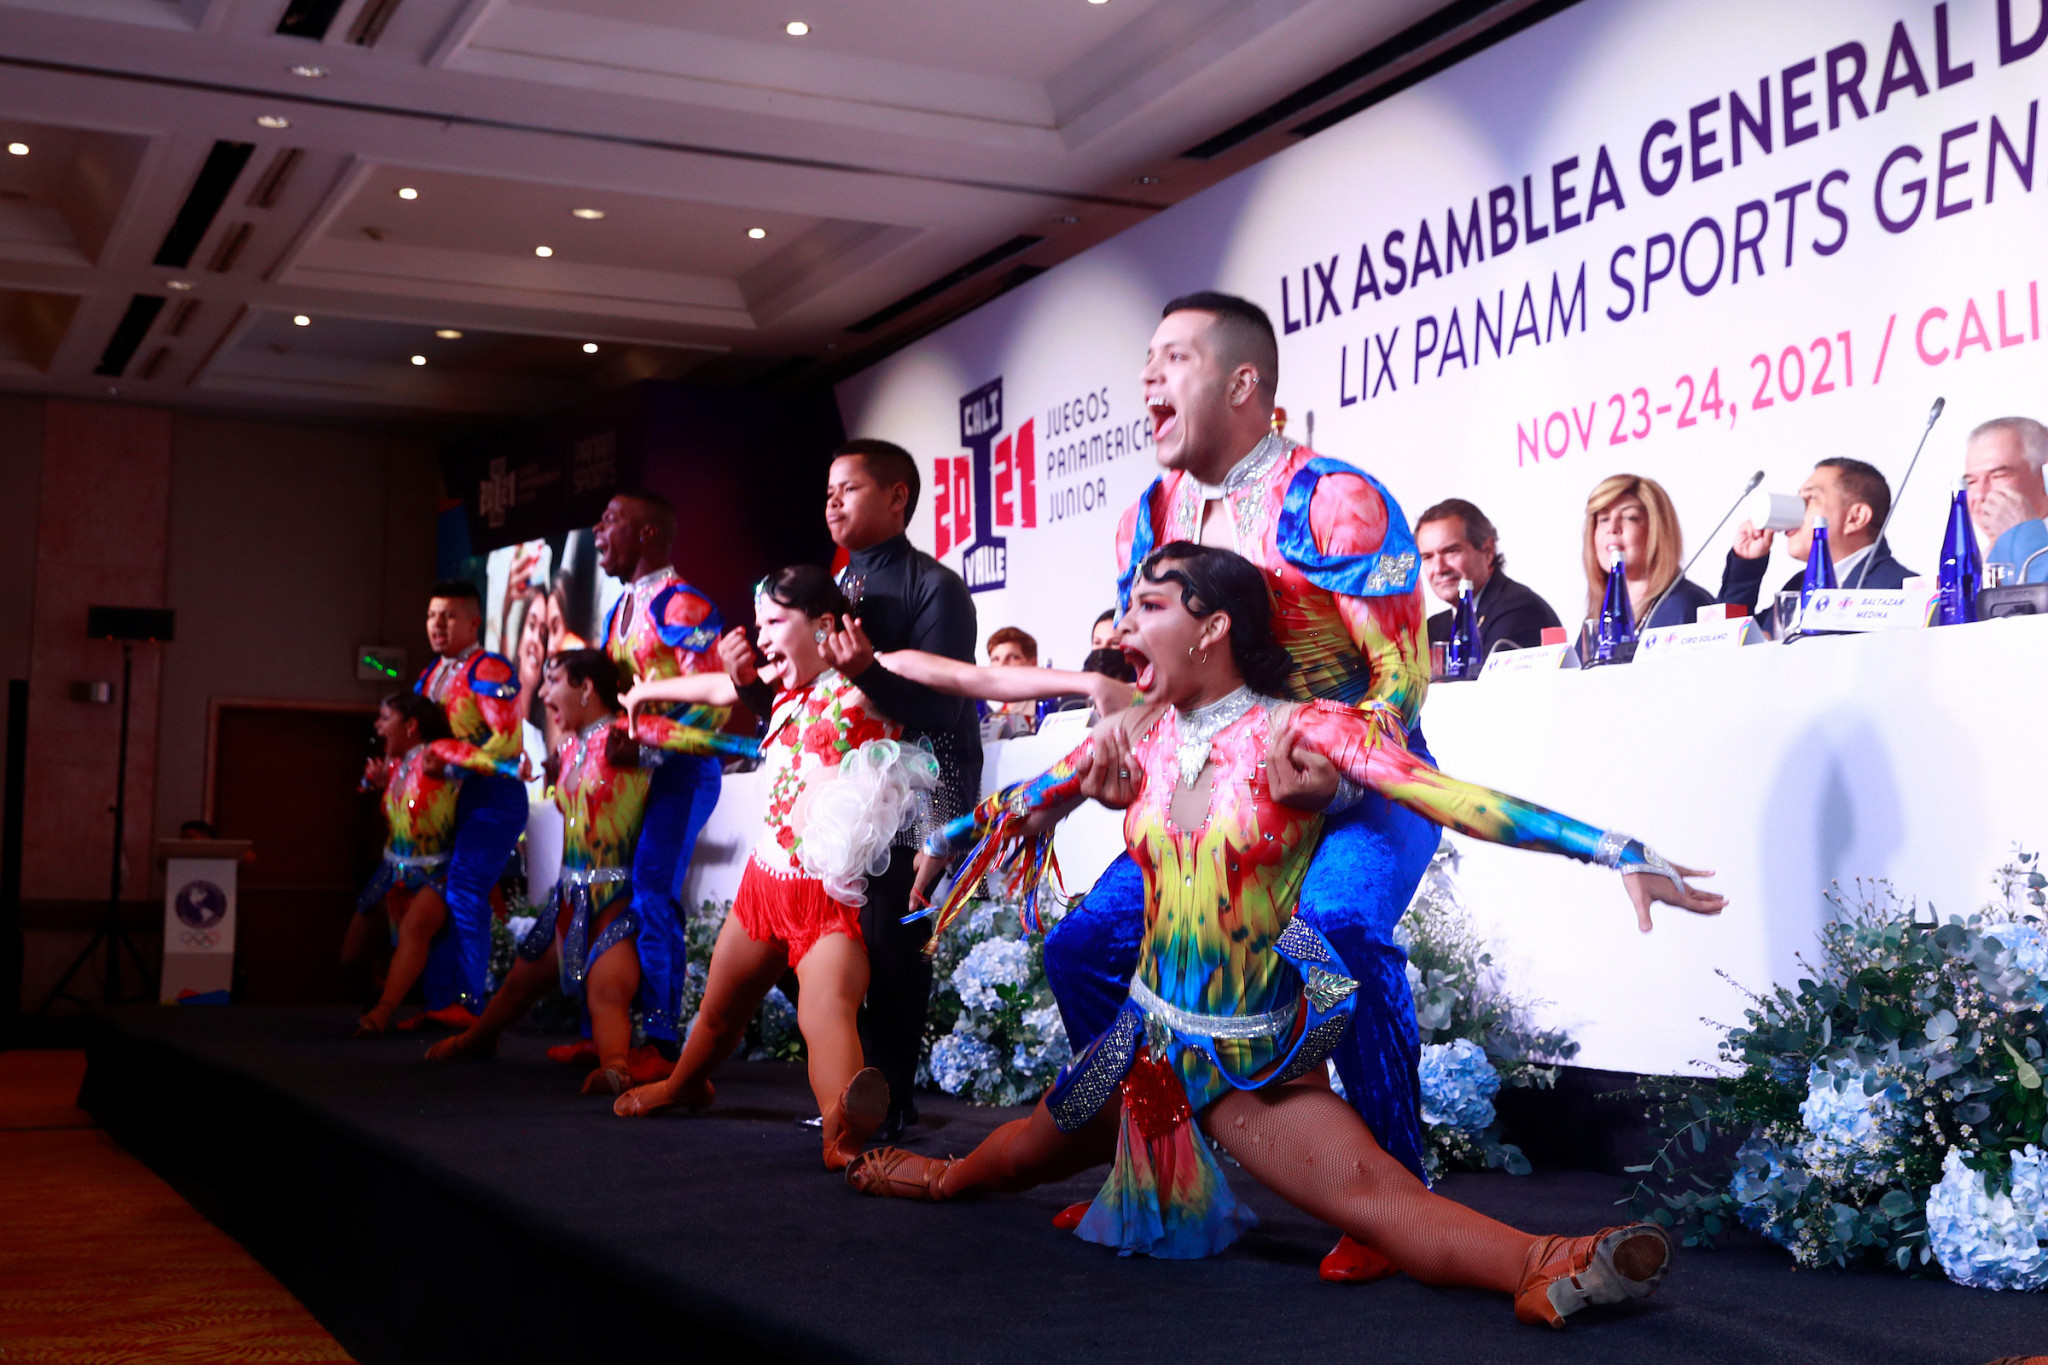 The General Assembly was opened with a traditional performance  of salsa dancing as Cali is the self-proclaimed salsa capital of the world ©Agencia.XpressMedia